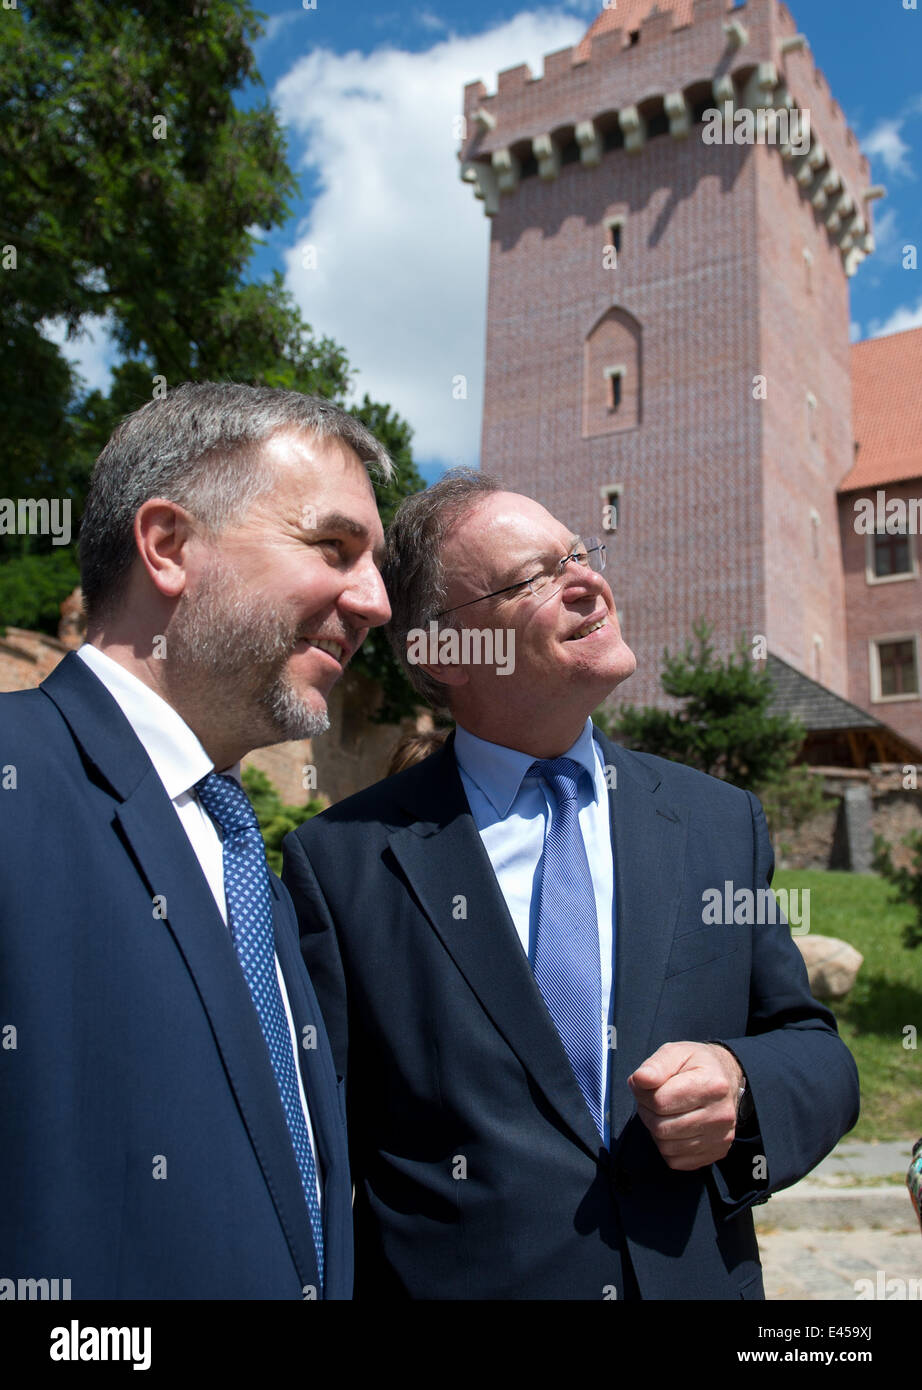 Poznan, Poland. 03rd July, 2014. President of the German Federal Council and Premier of Lower Saxony Stephan Weil (L) poses with Greater Poland Voivode Marek Wozniak in the historic inner city in Poznan, Poland, 03 July 2014. Weil is attending political talks in Warsaw in his role as Federal Council President. Photo: JOCHEN LUEBKE/dpa/Alamy Live News Stock Photo